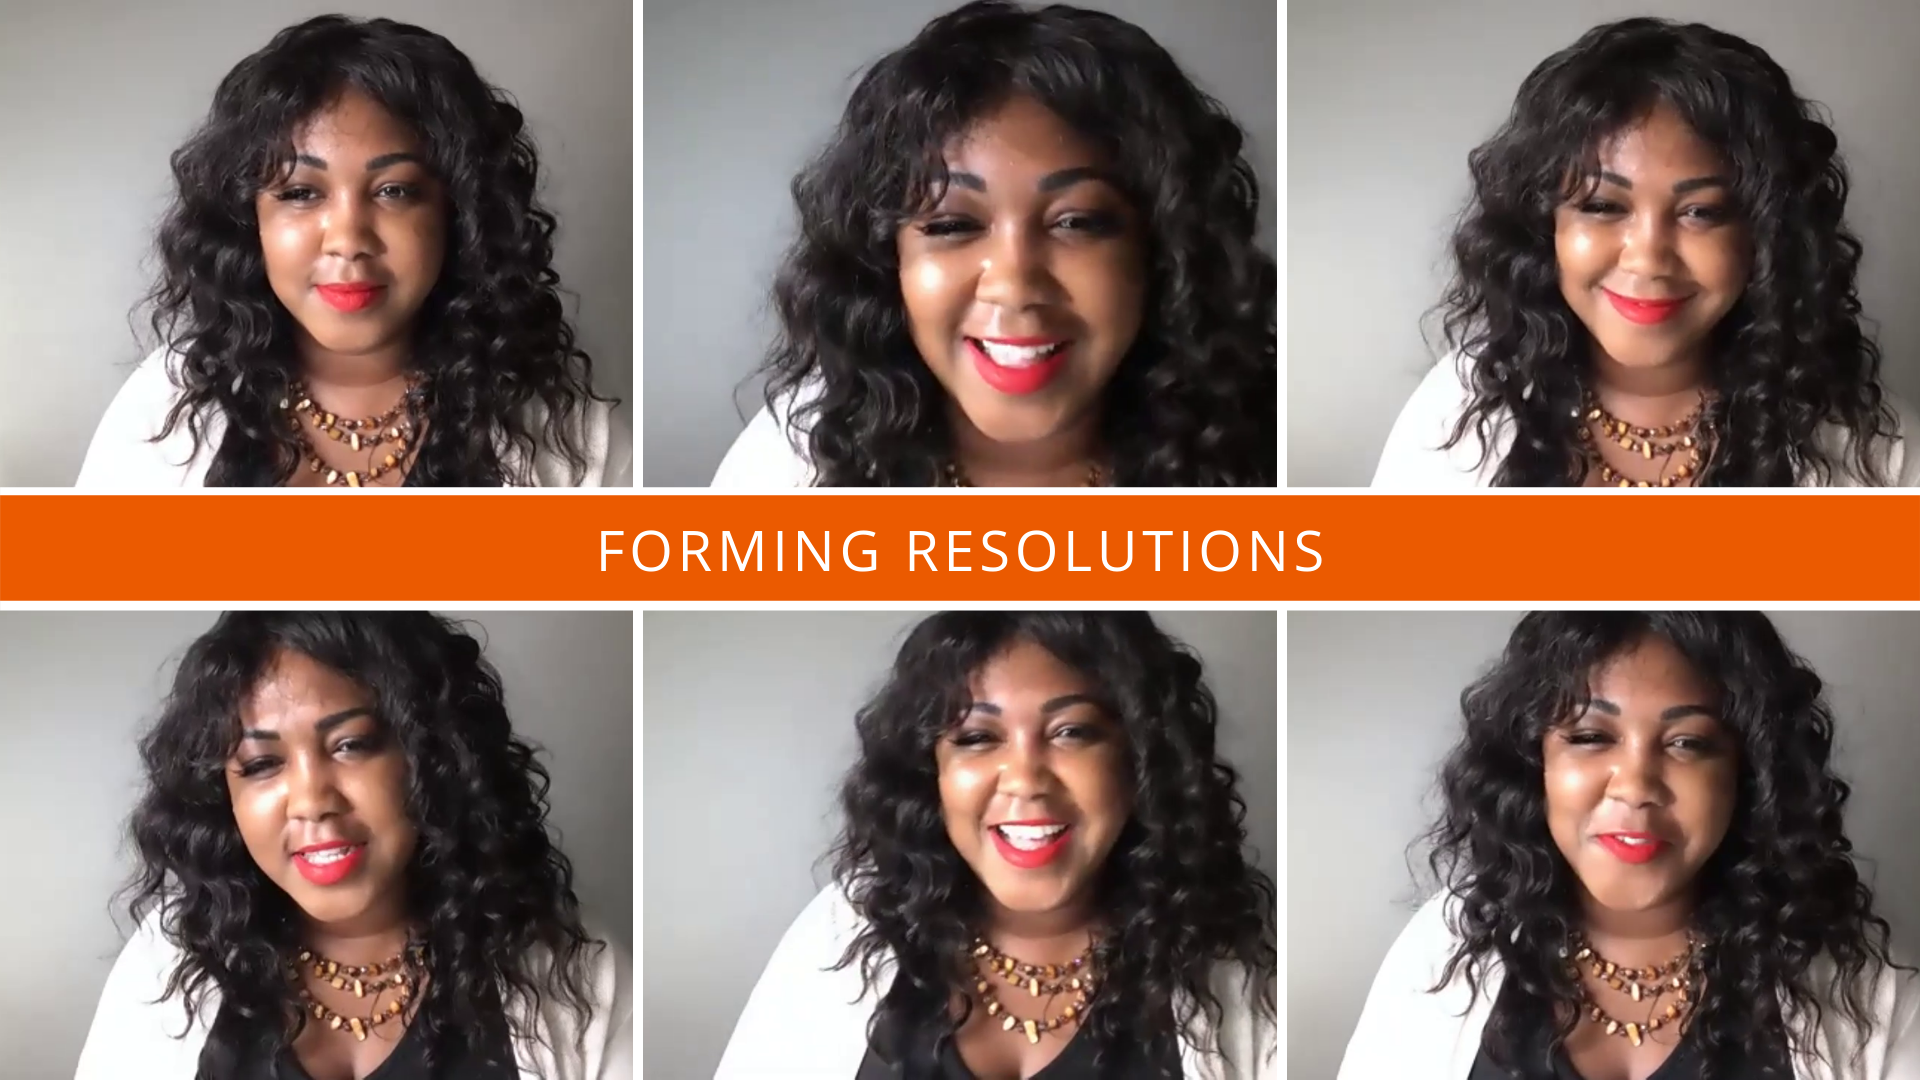 Seattle Therapist Ashley McGirt on how to create good resolutions, put them into practice, and follow through.